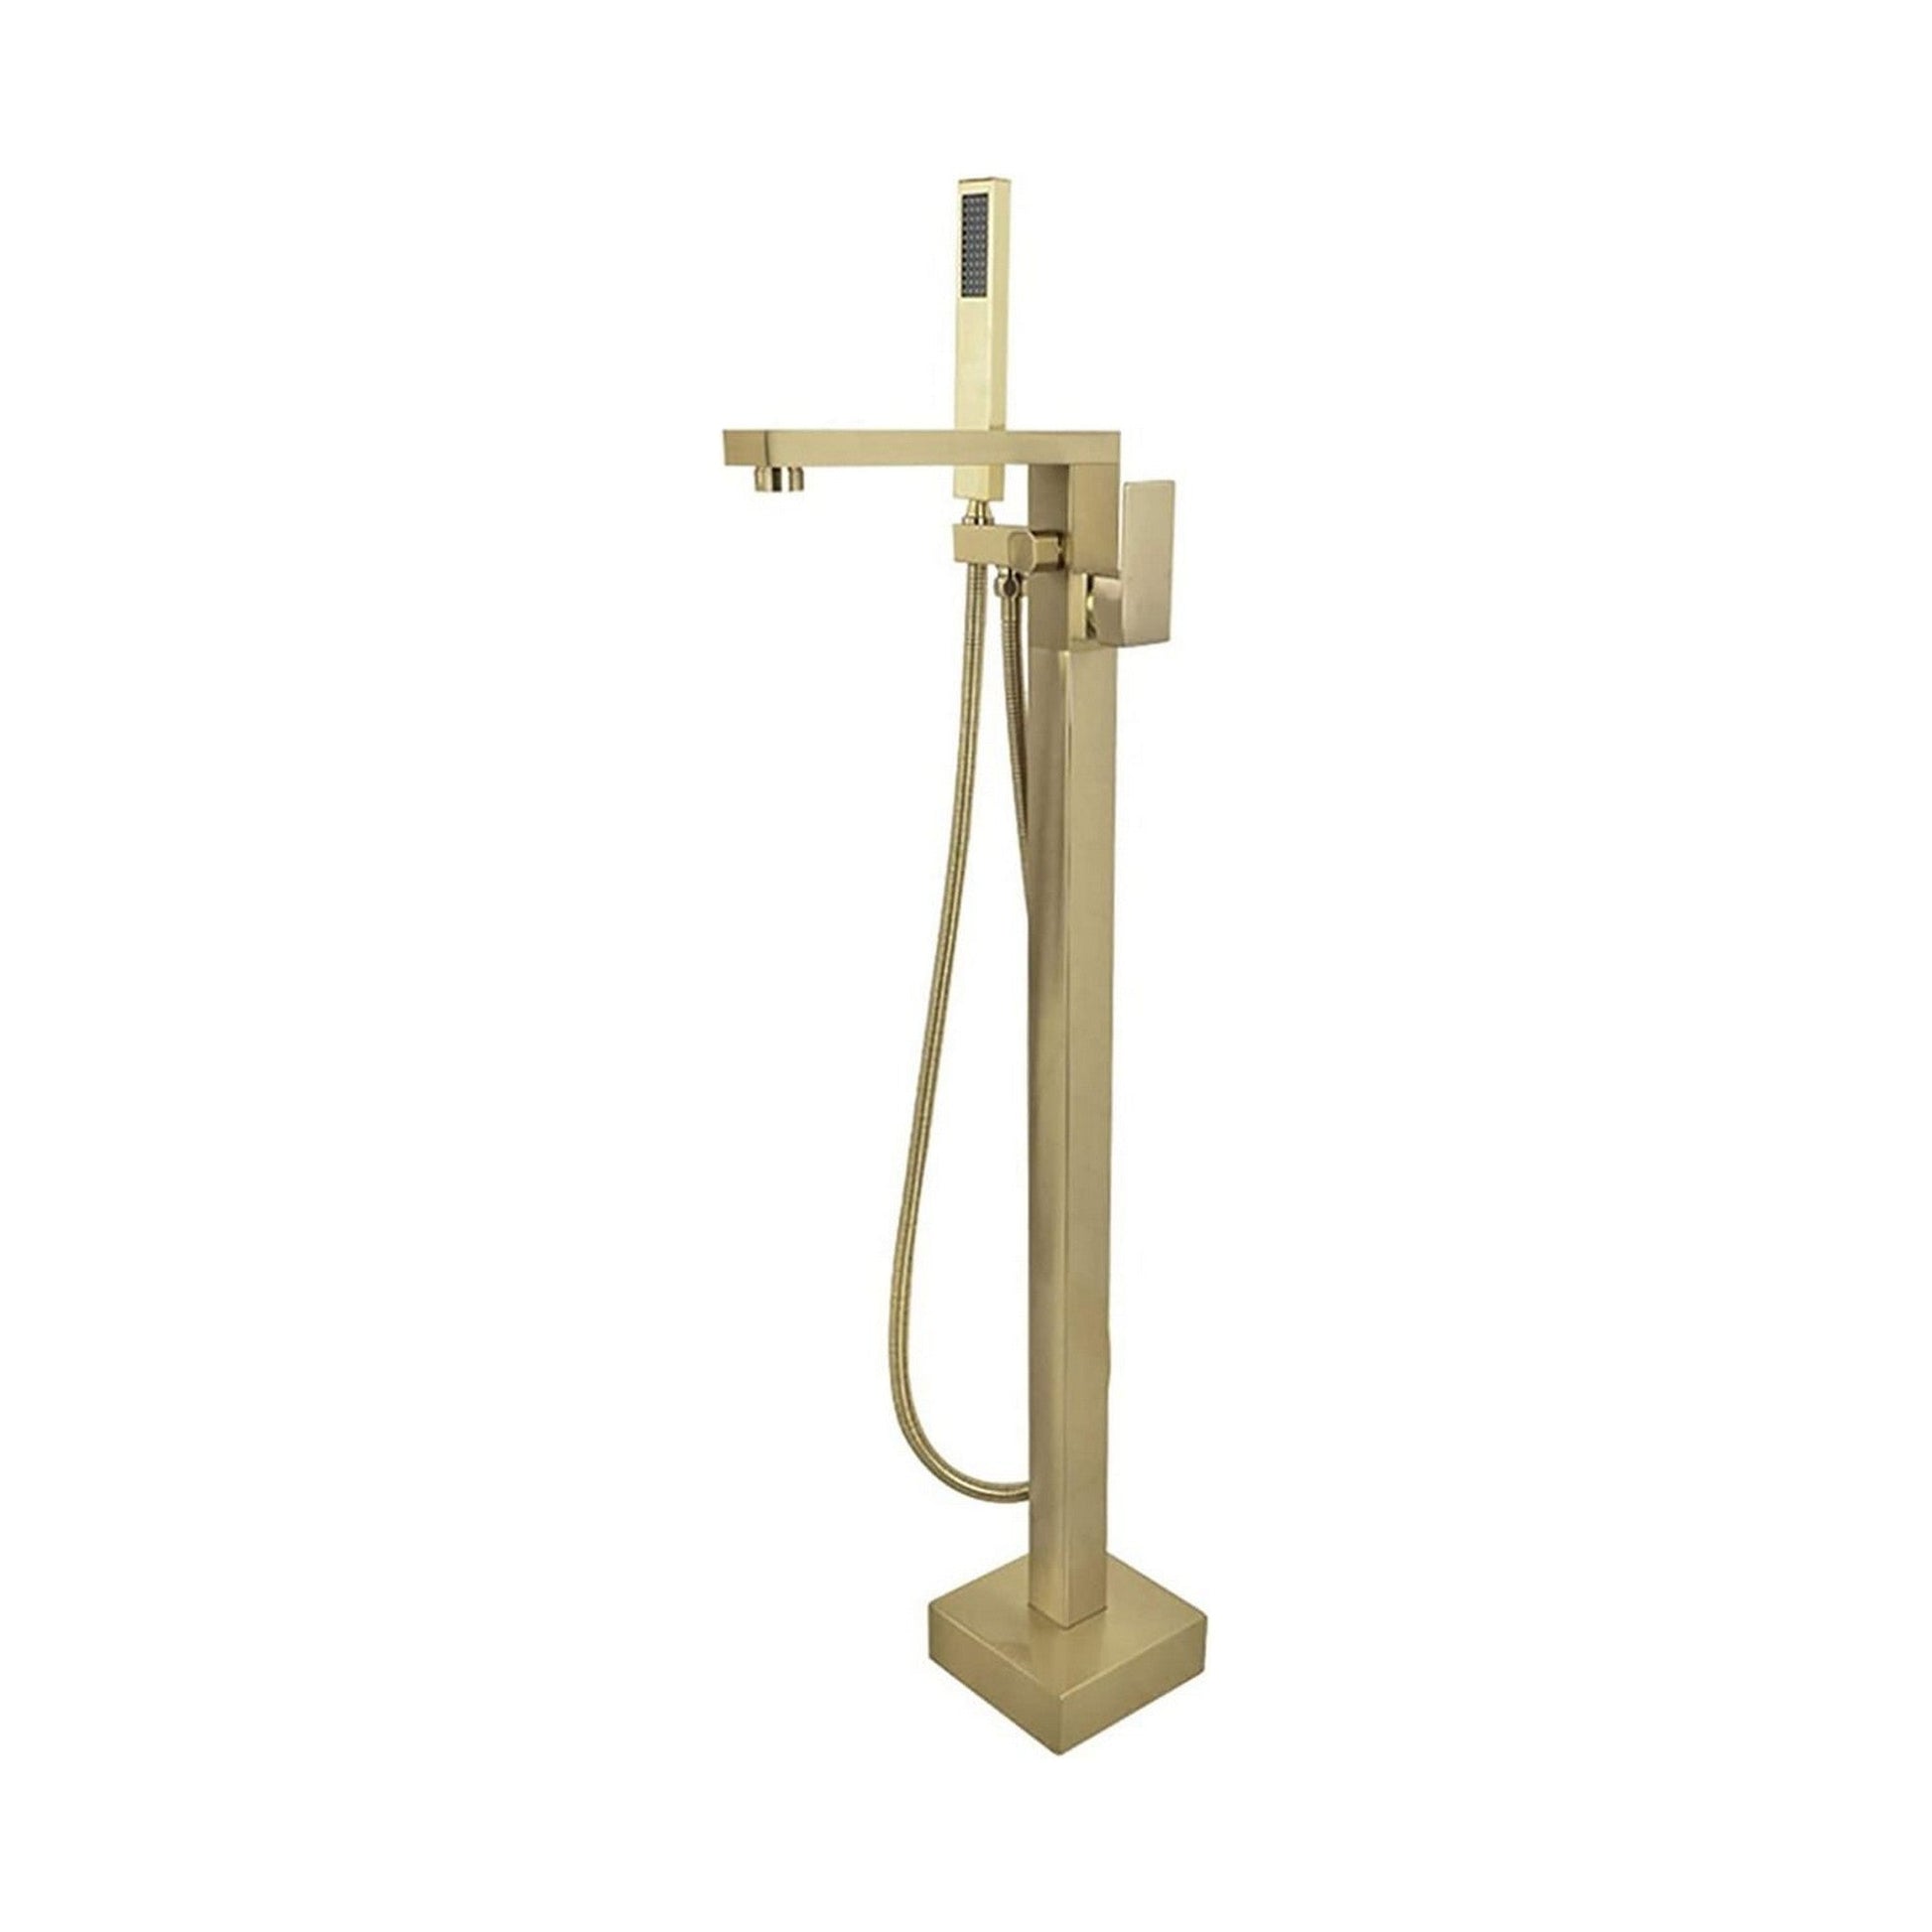 Ratel 7" x 37" Brushed Gold Floor-Mounted Bathtub Faucet With Hand Shower